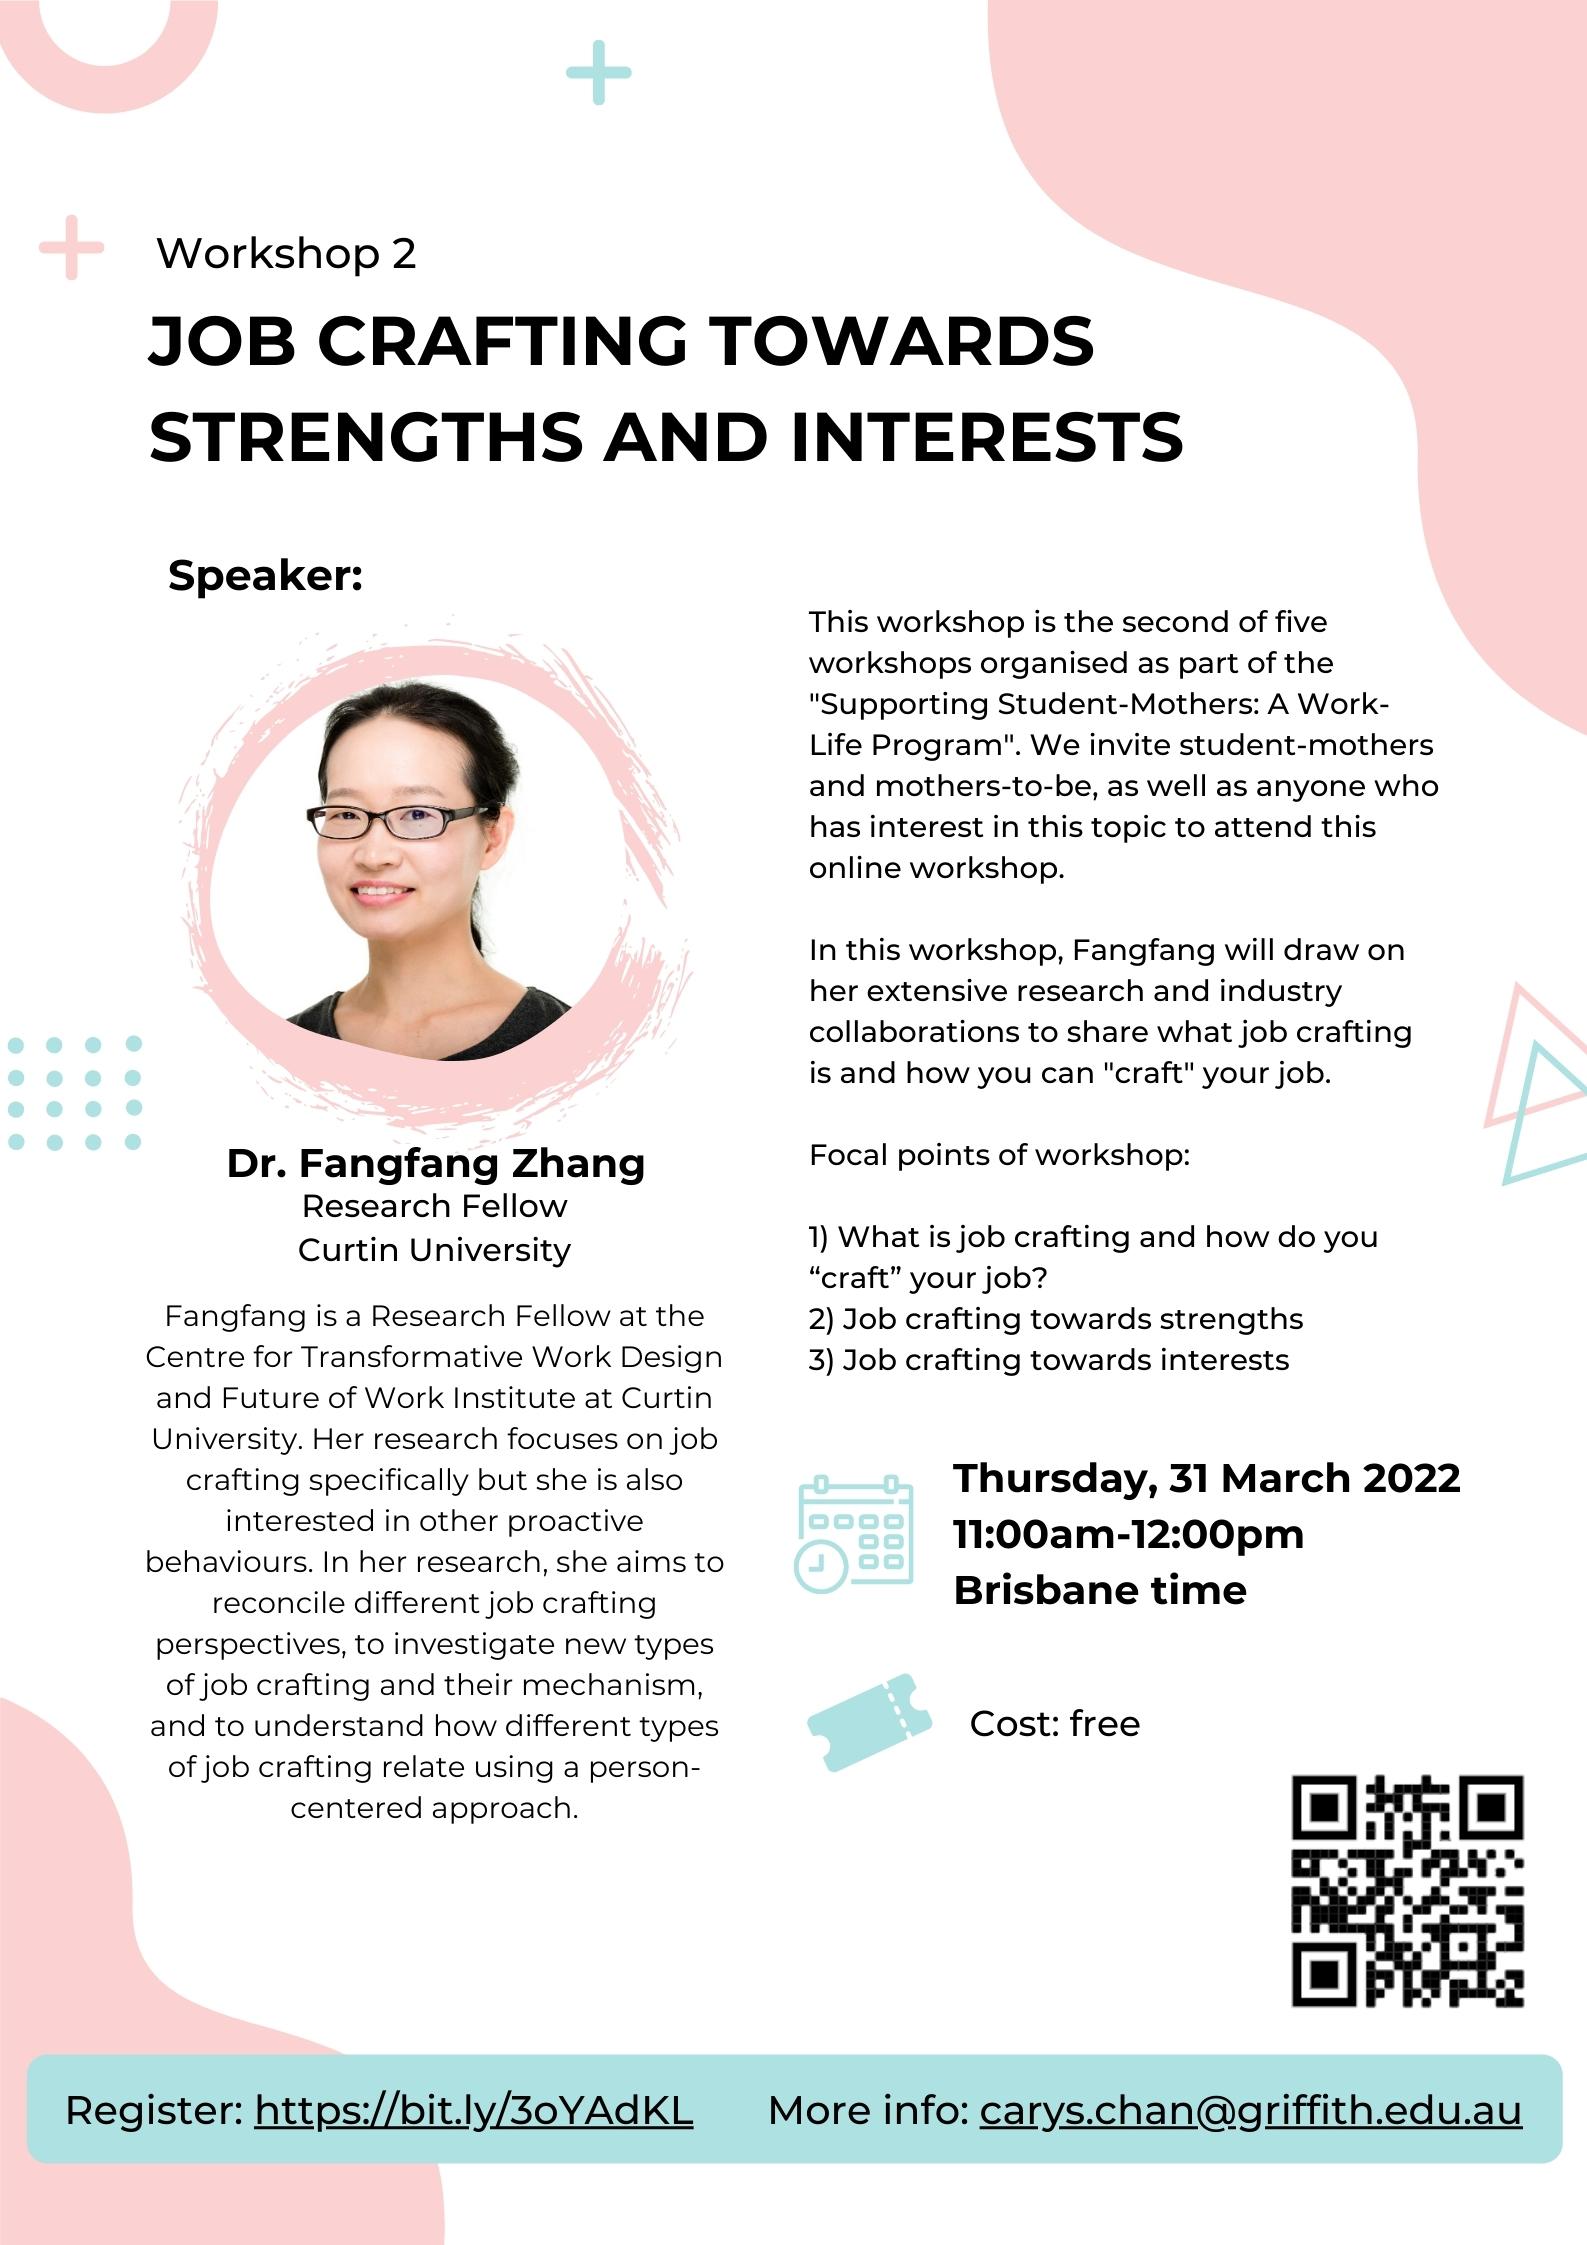 Supporting Student-Mothers - Workshop 2: Job Crafting Towards Strengths and Interests